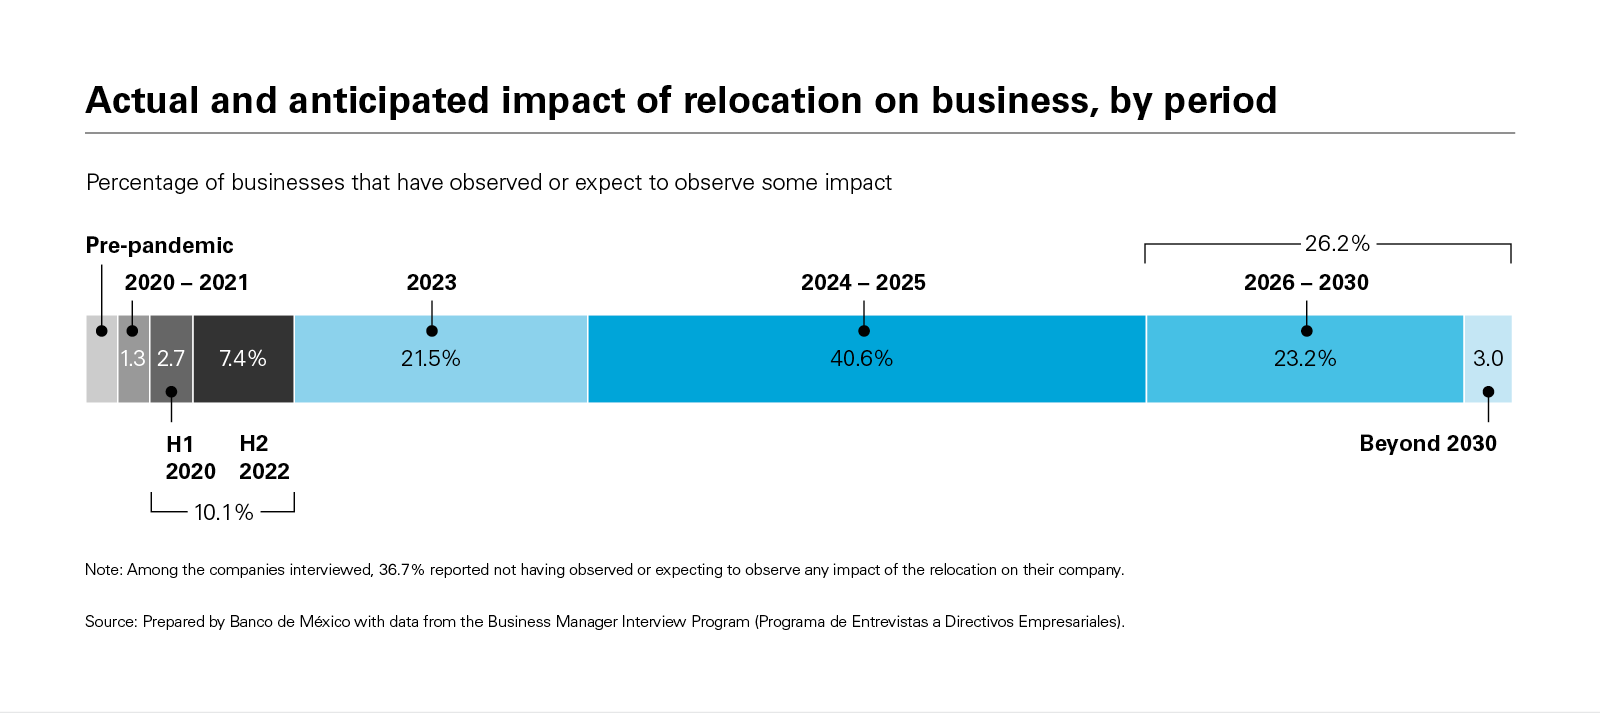 Actual and anticipated impact of relocation on business, by period